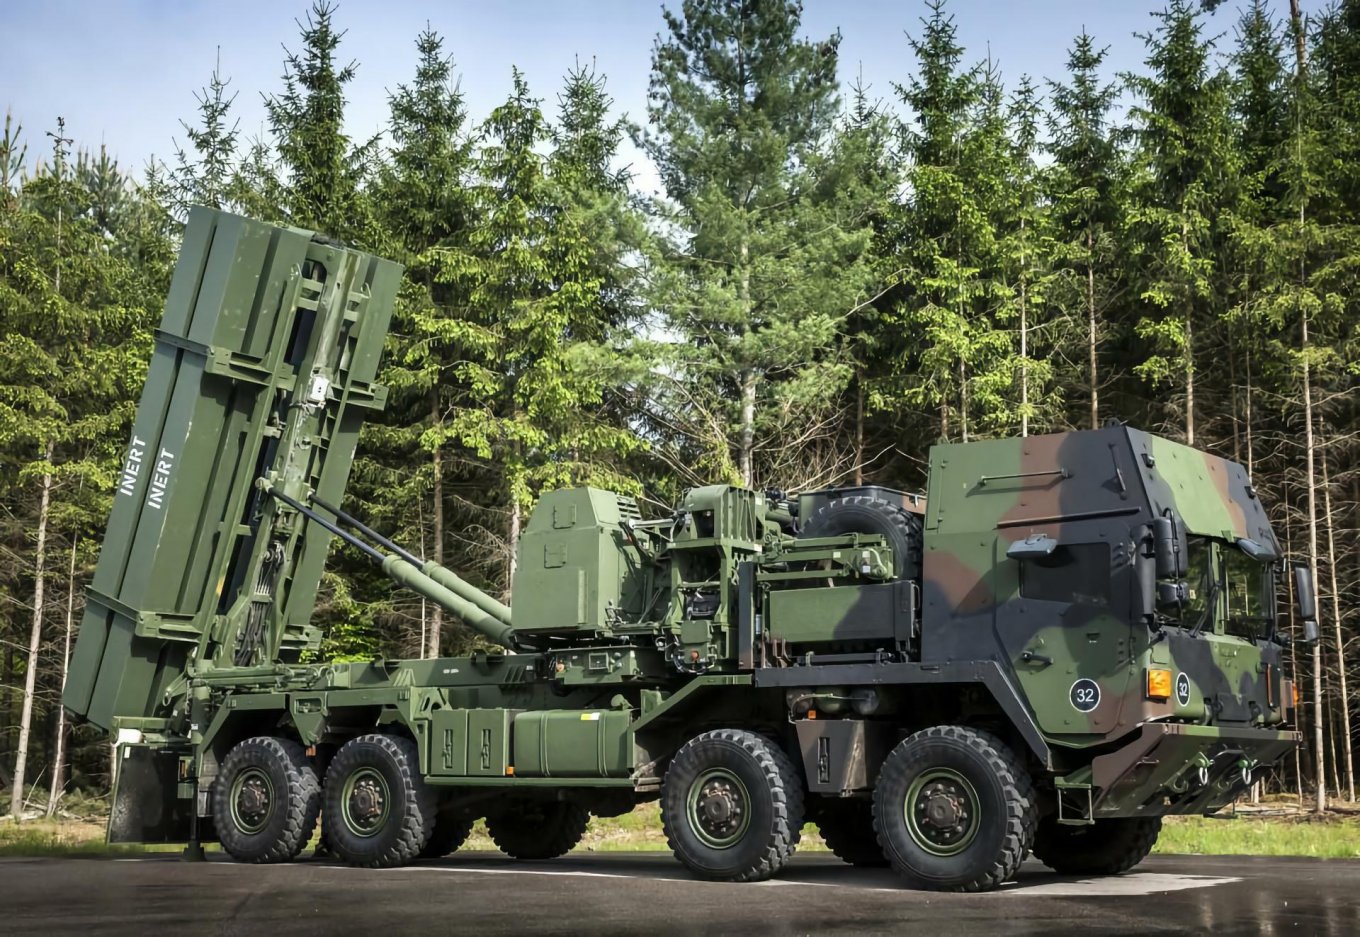 IRIS-T SLM is medium-range air defense system with the ability to destroy targets at a distance of up to 40 km and 20 km in height, Defense Express